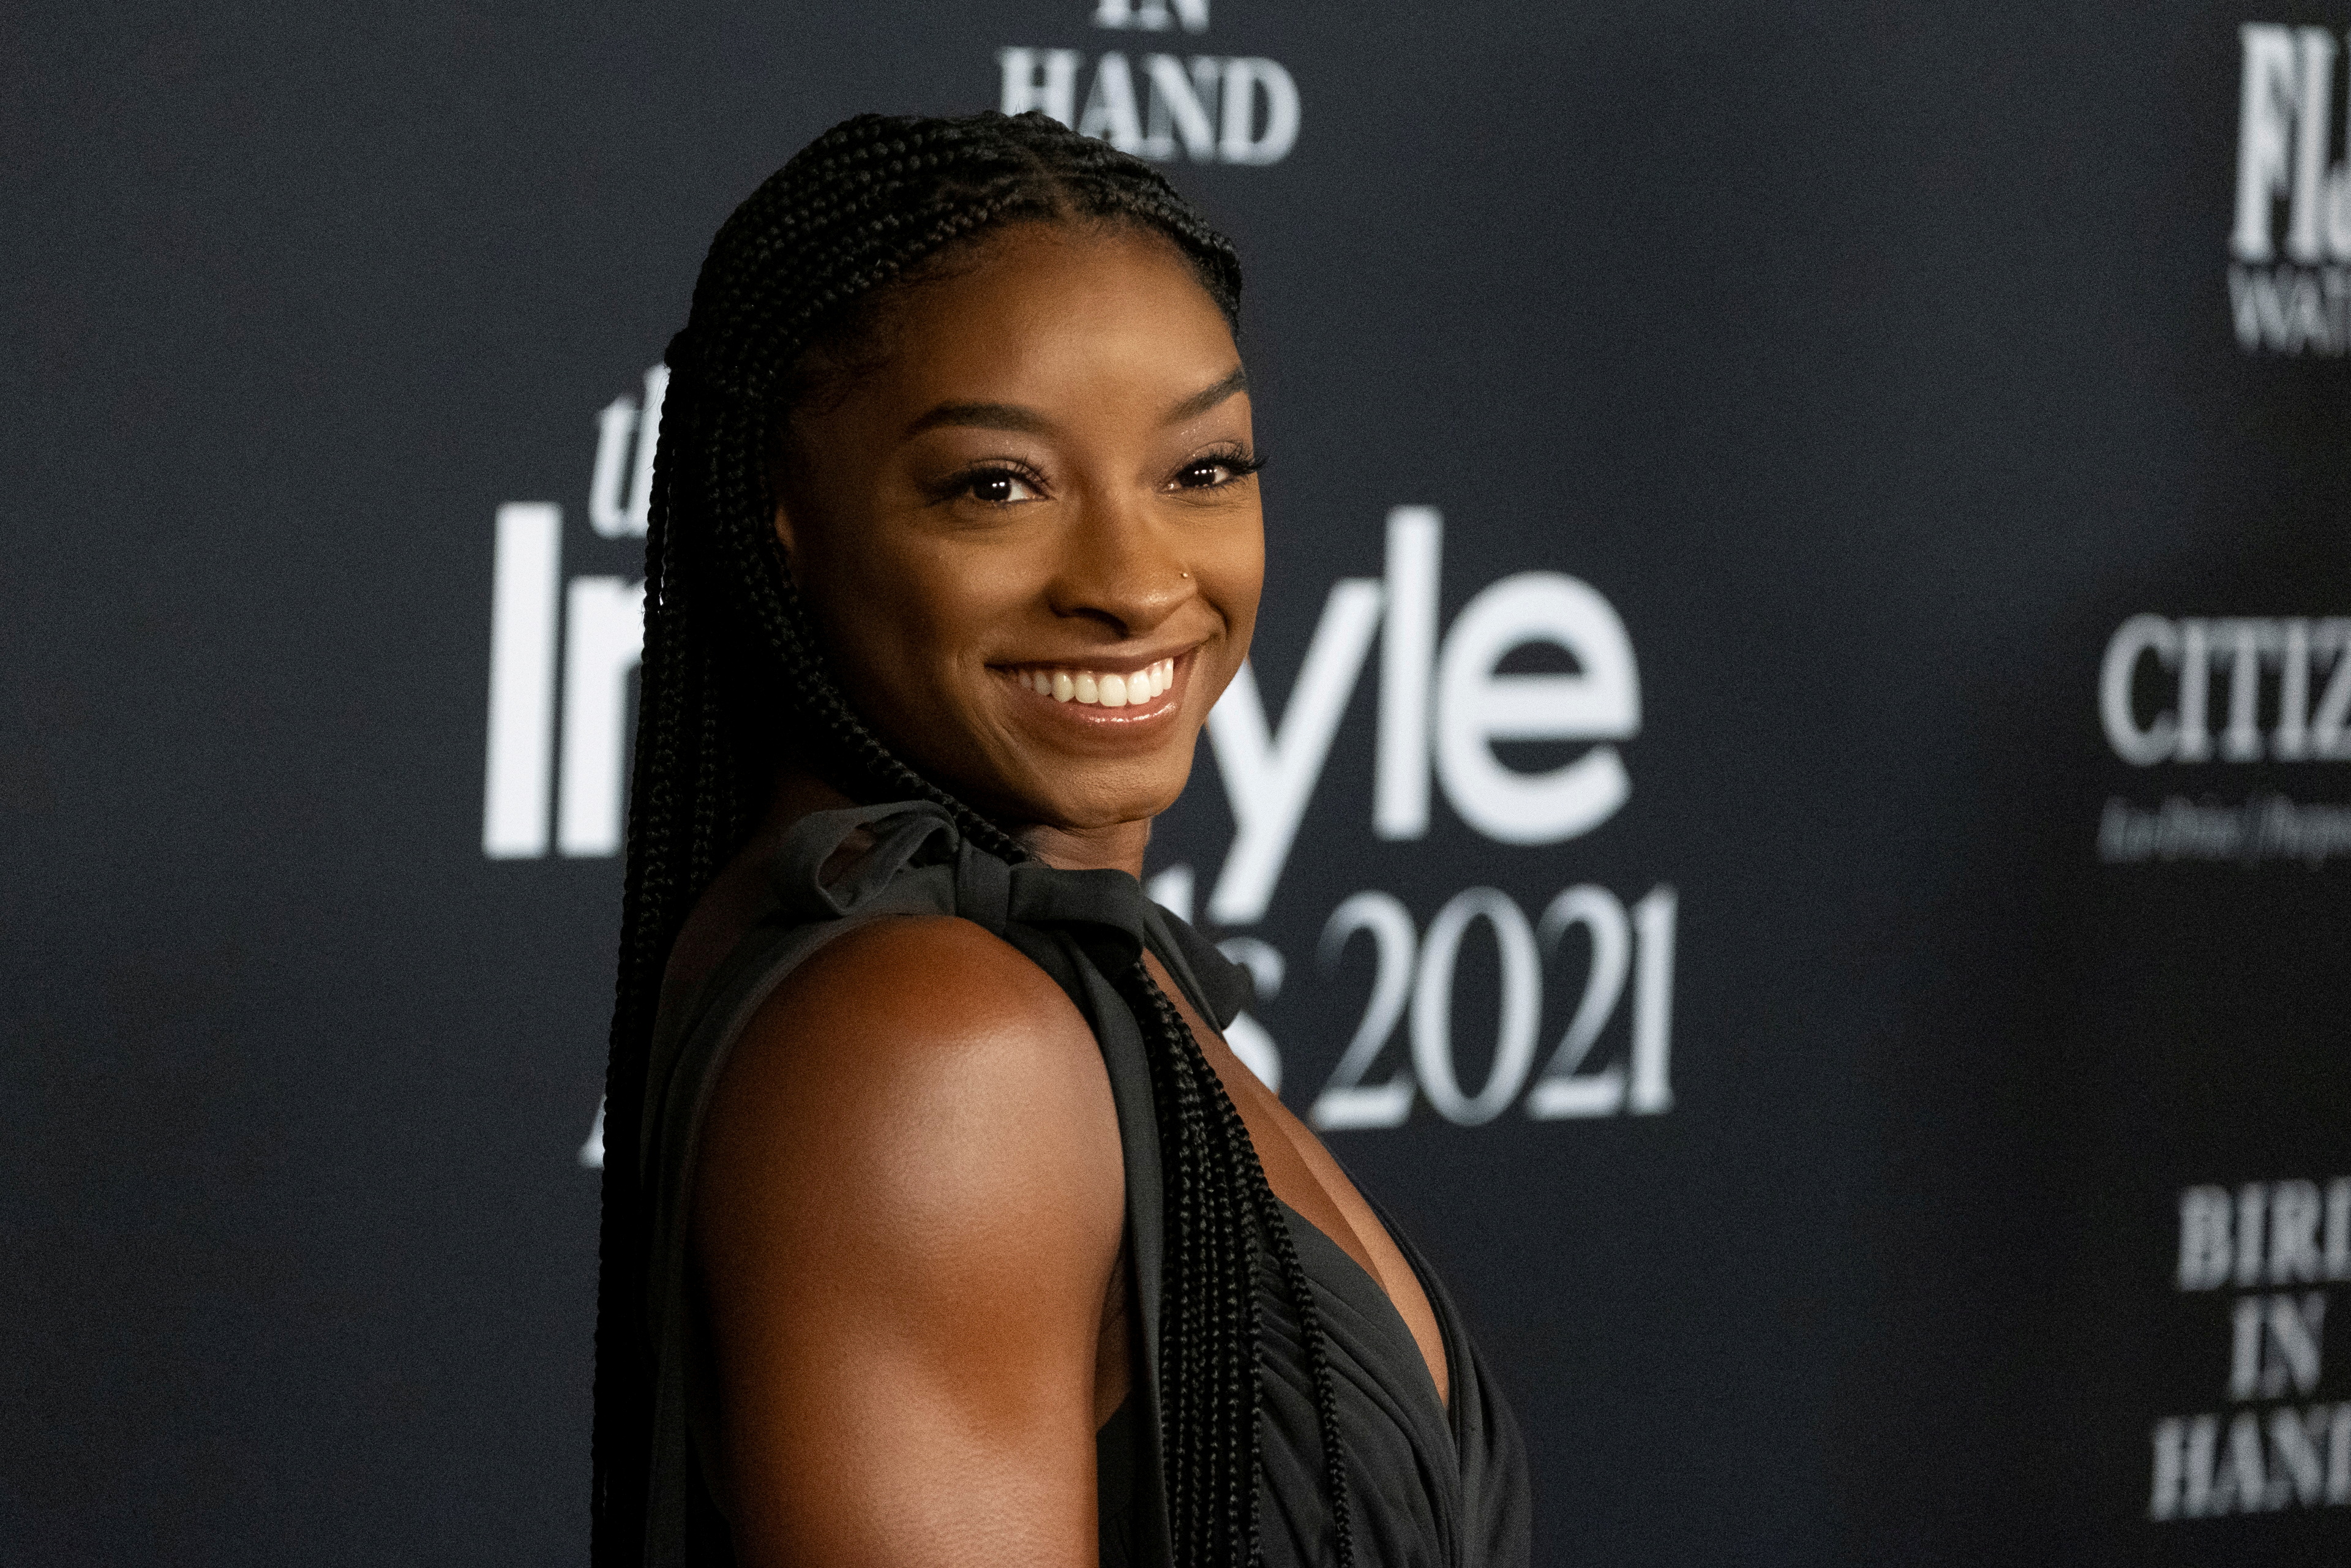 FILE PHOTO: U.S. Olympic gymnast Simone Biles attends the 6th annual InStyle Awards at The Getty Center in Los Angeles, California, U.S., November 15, 2021.  REUTERS/Ringo Chiu/File Photo